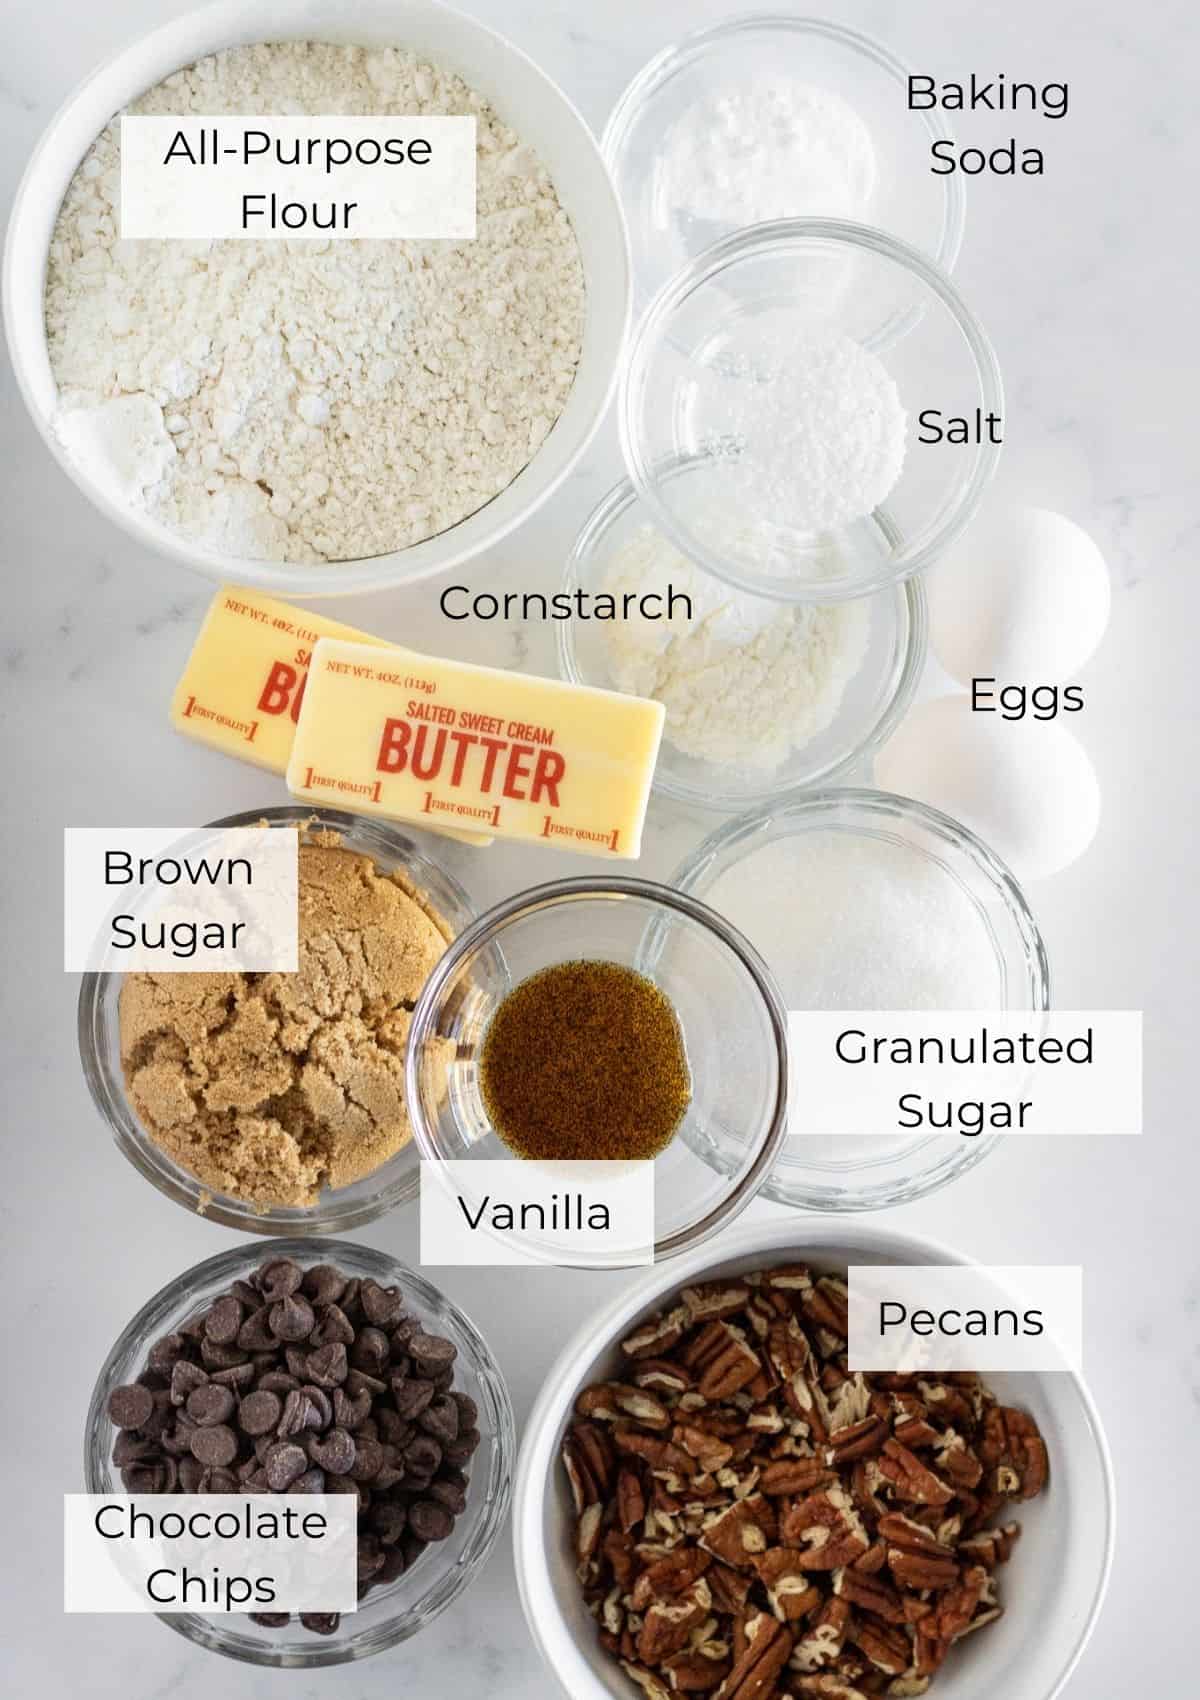 Ingredients needed to make Chocolate Chip and Pecan Cookies.